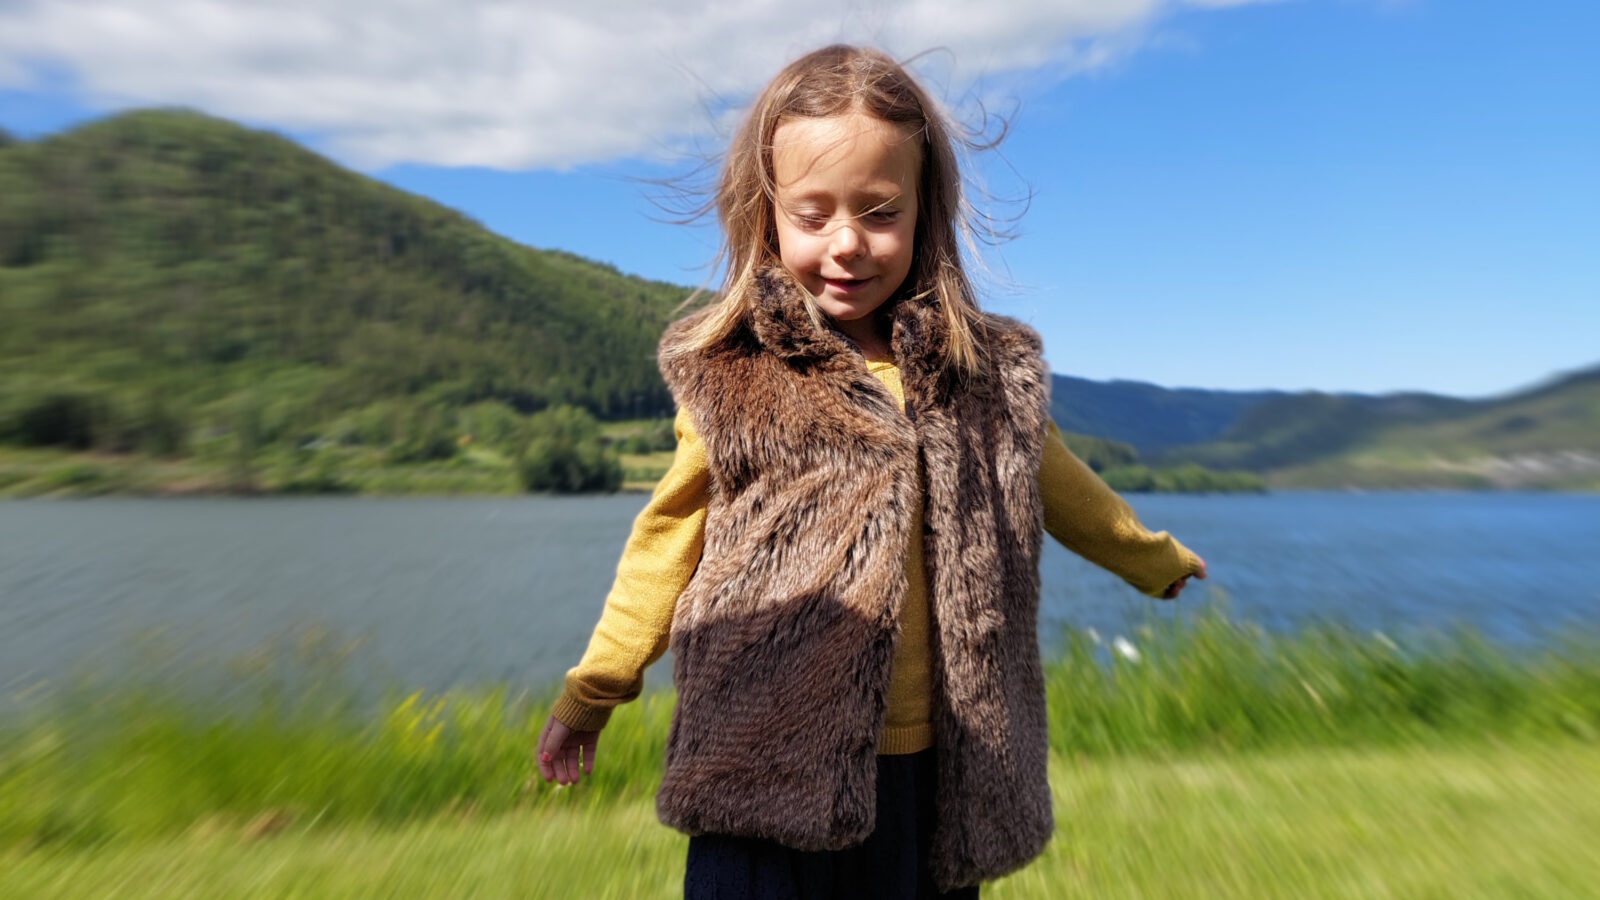 A child in Norwegian nature.